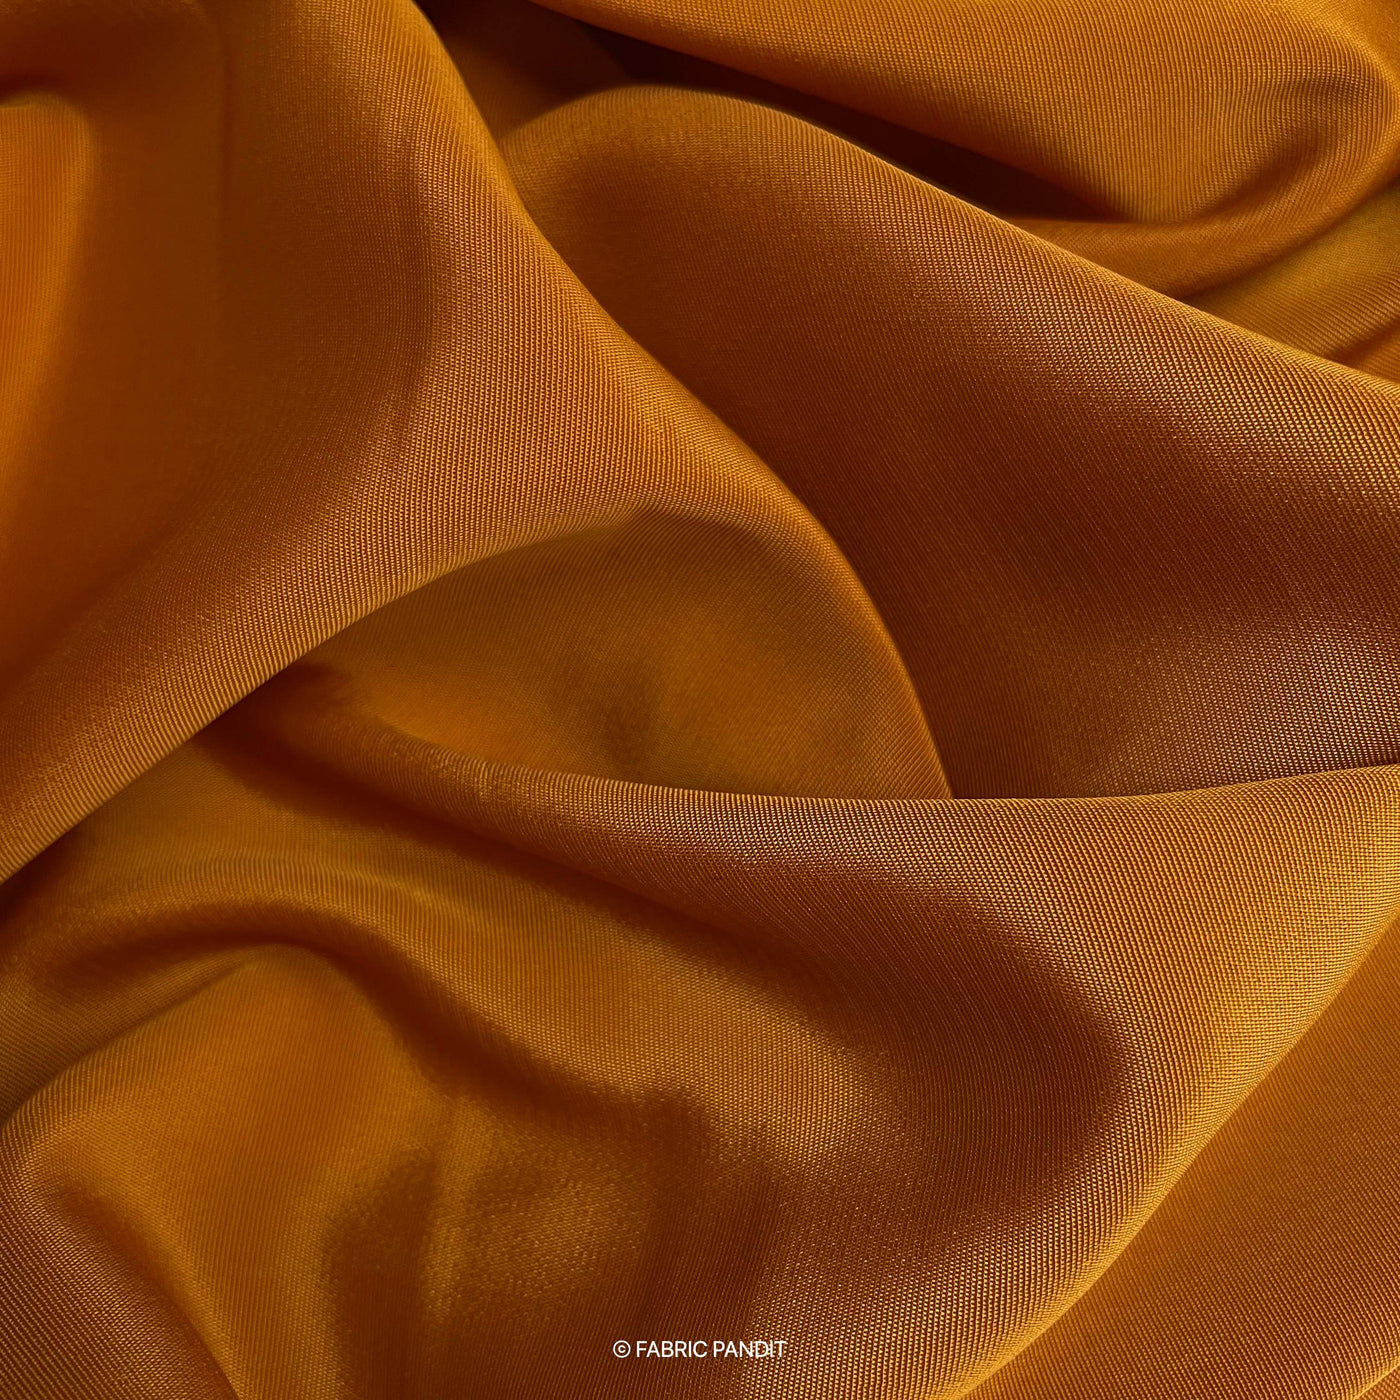 Fabric Pandit Cut Piece (CUT PIECE) Caramel Brown Premium French Crepe Fabric (Width 44 inches)